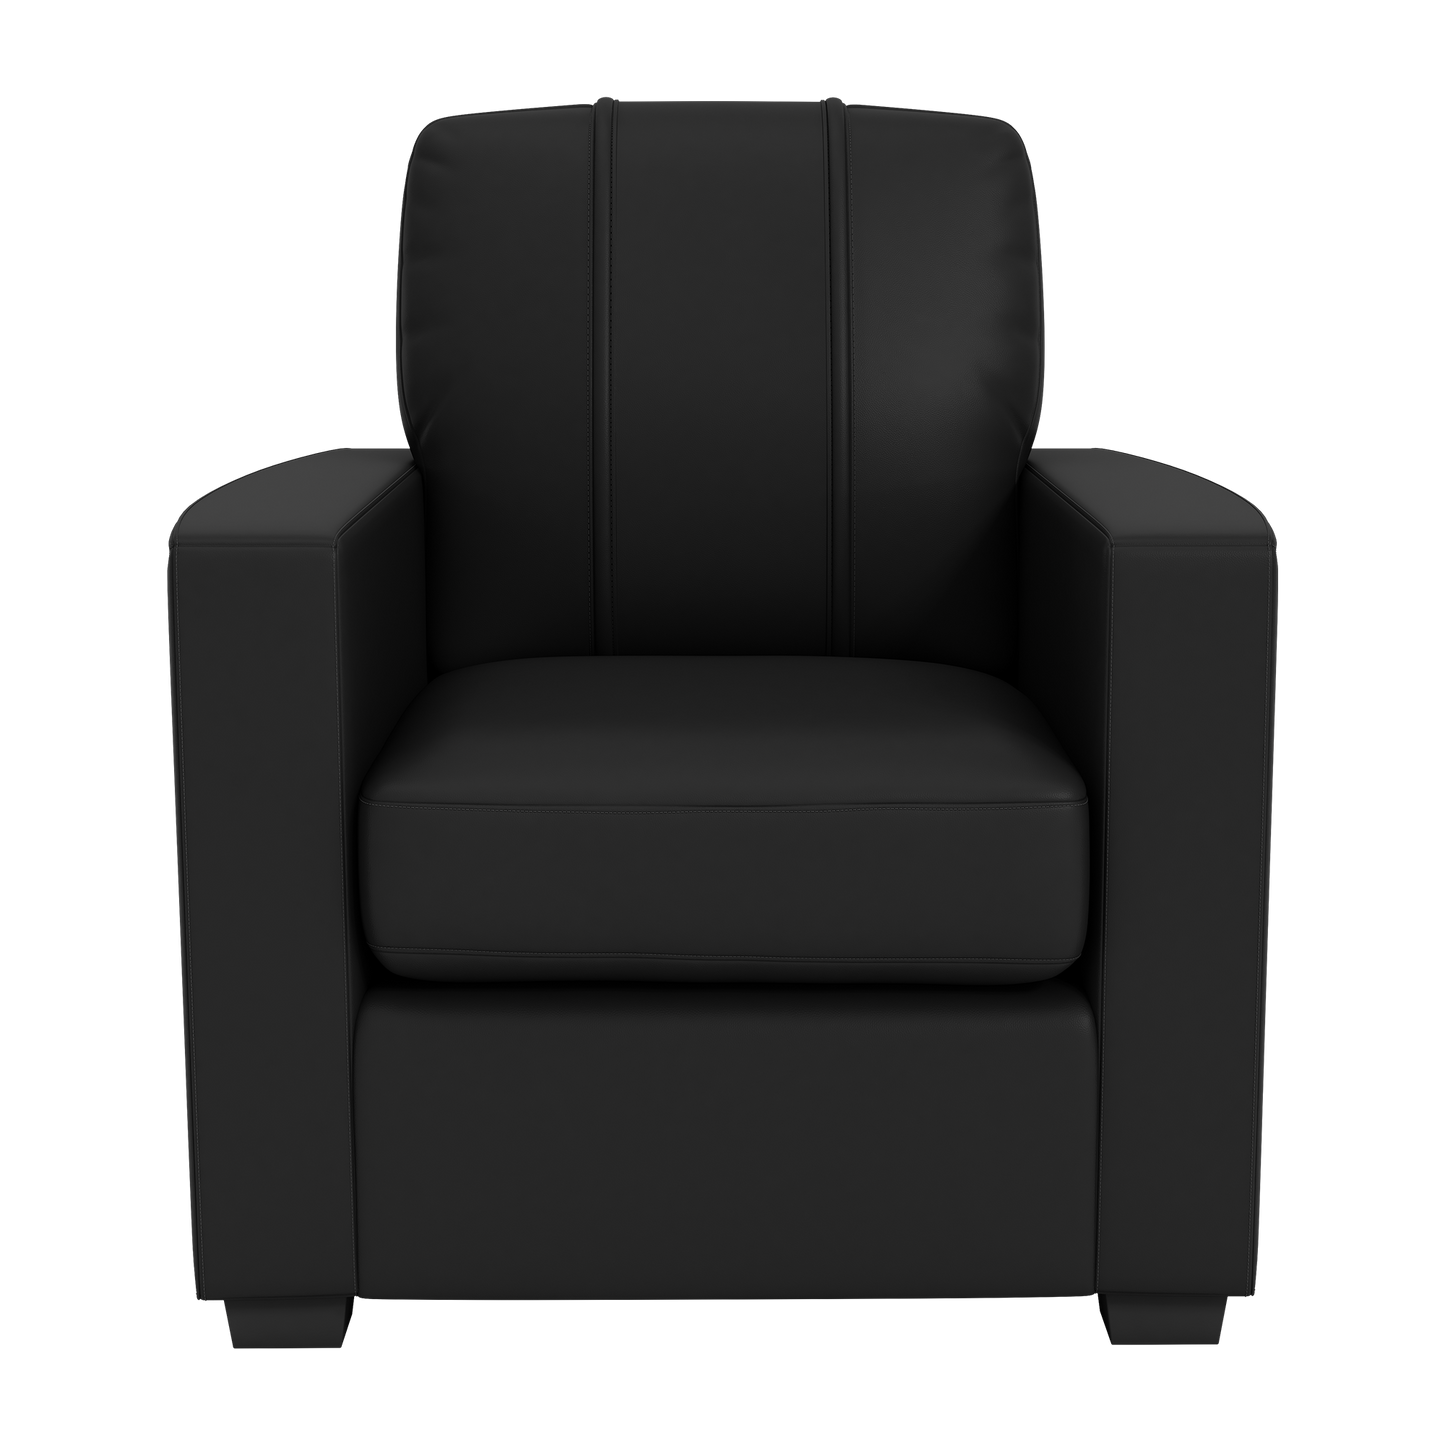 Silver Club Chair with New York Yankees Logo